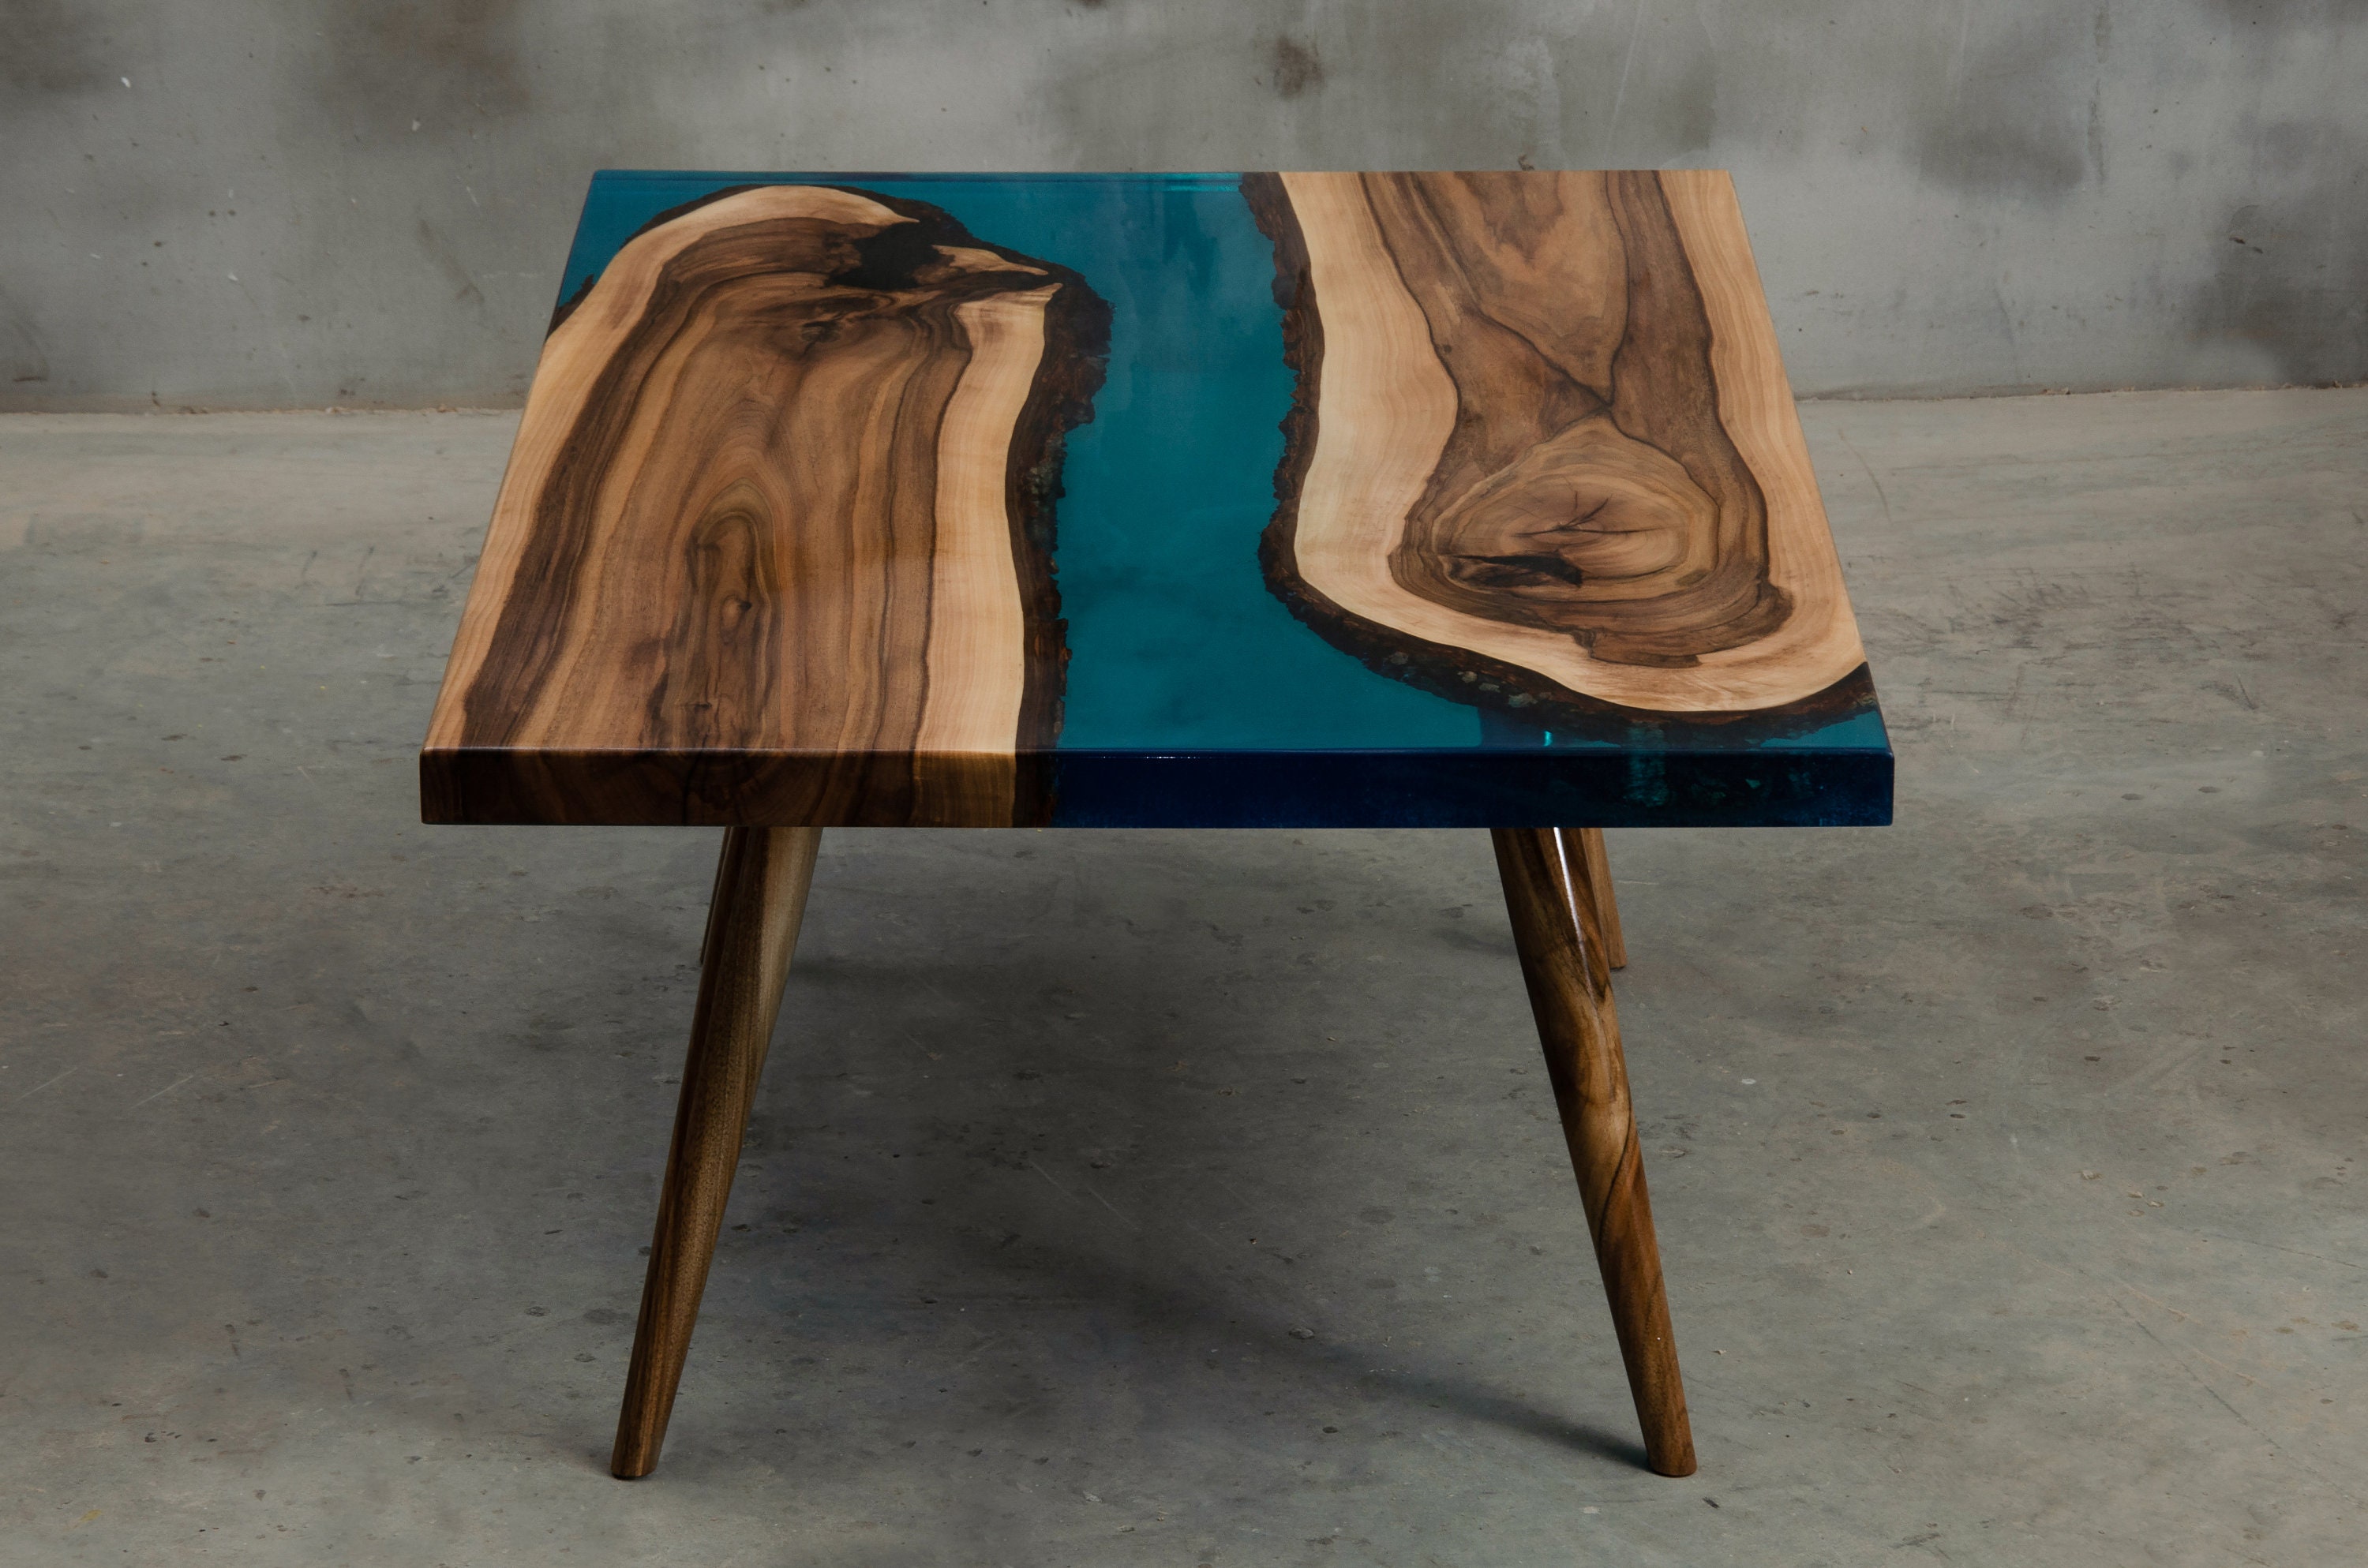 Make a DIY Walnut Wood and Epoxy Resin Table with Amy – Forest 2 Home